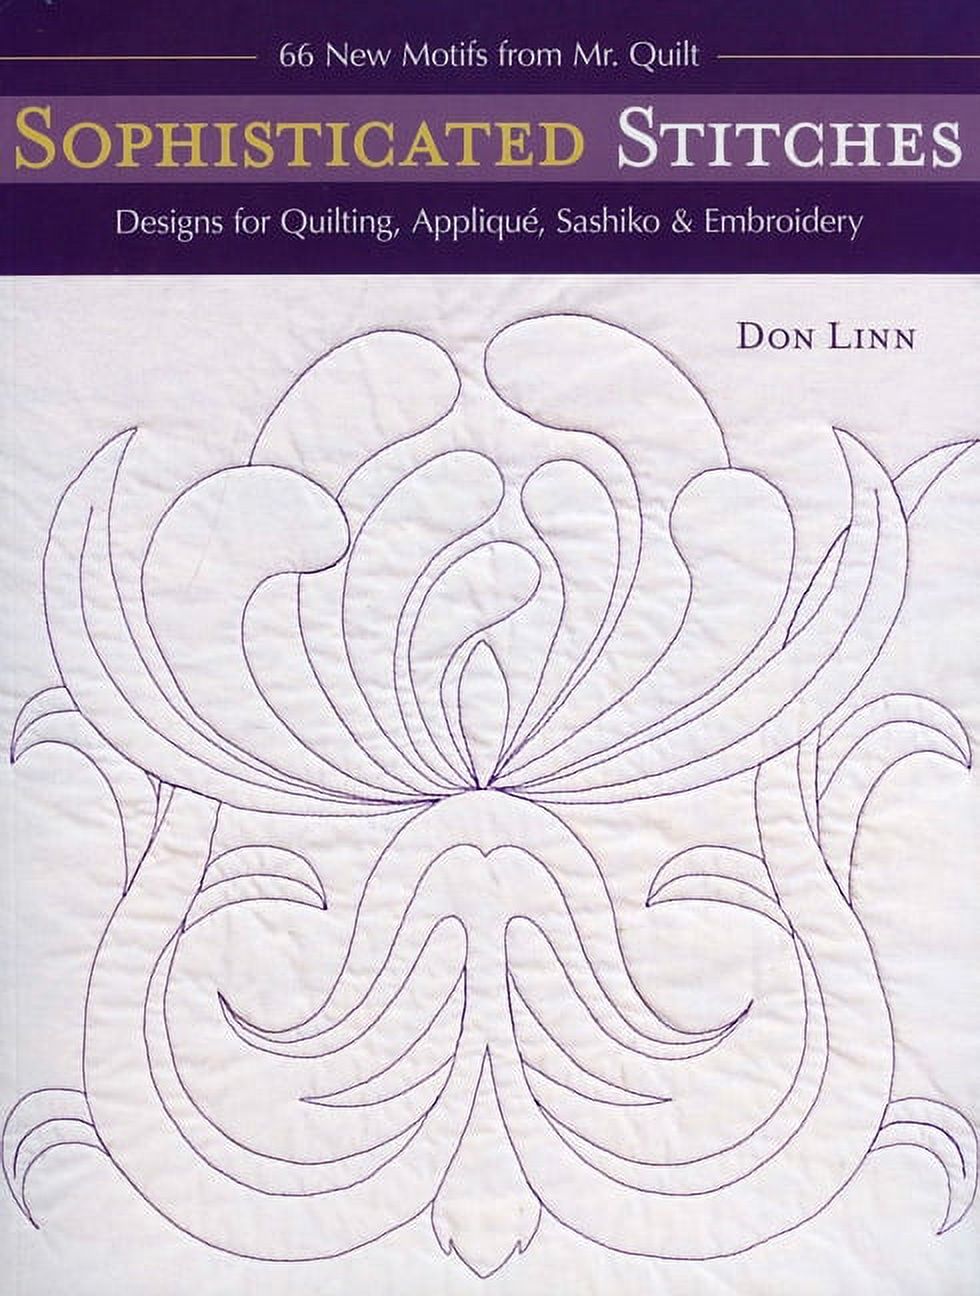 Sophisticated Stitches : Designs for Quilting, Applique, Sashiko & Embroidery (Paperback) - image 1 of 1